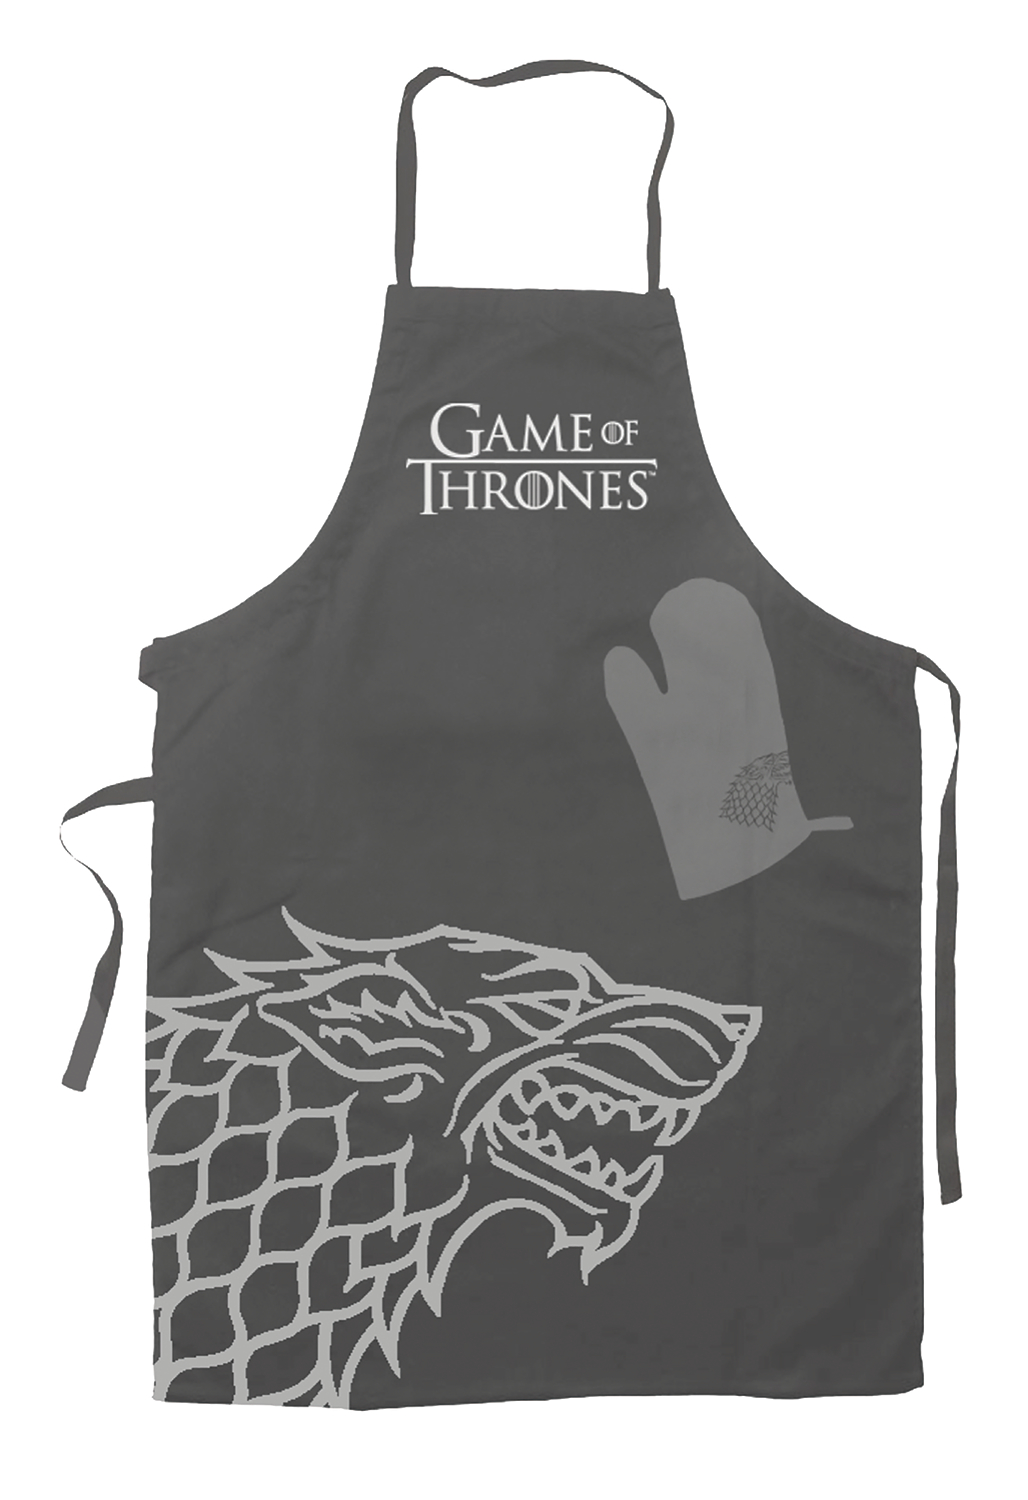 Game of Thrones Apron and Oven Mitt Set Lannister